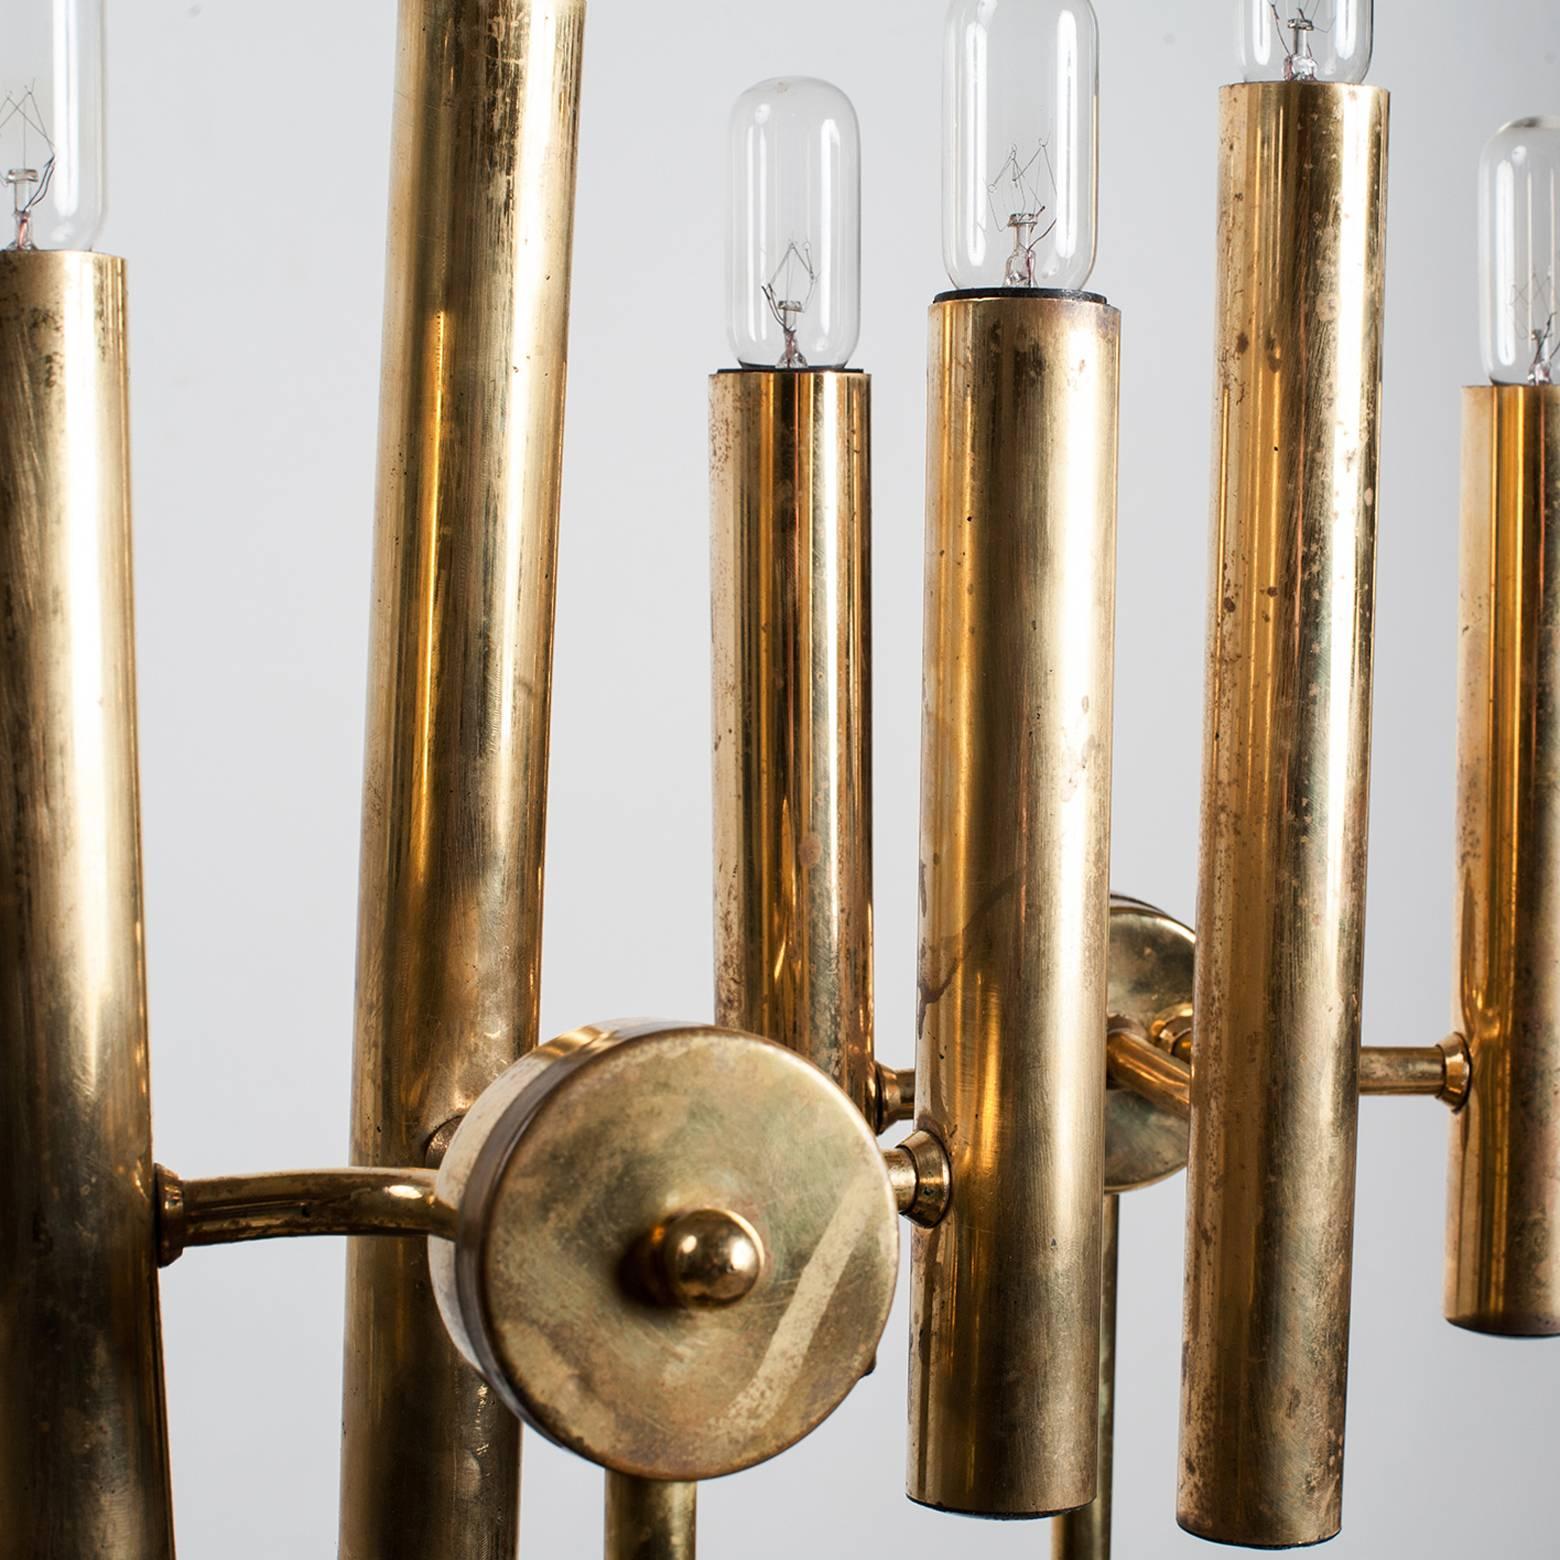 Pair Table lamps forming clandestick, swedish designer attributes Hans Agne Jakobsson.
Structure in gilded brass, circular base topped by a central shell, on the uper part is detachable 3 arms of light.